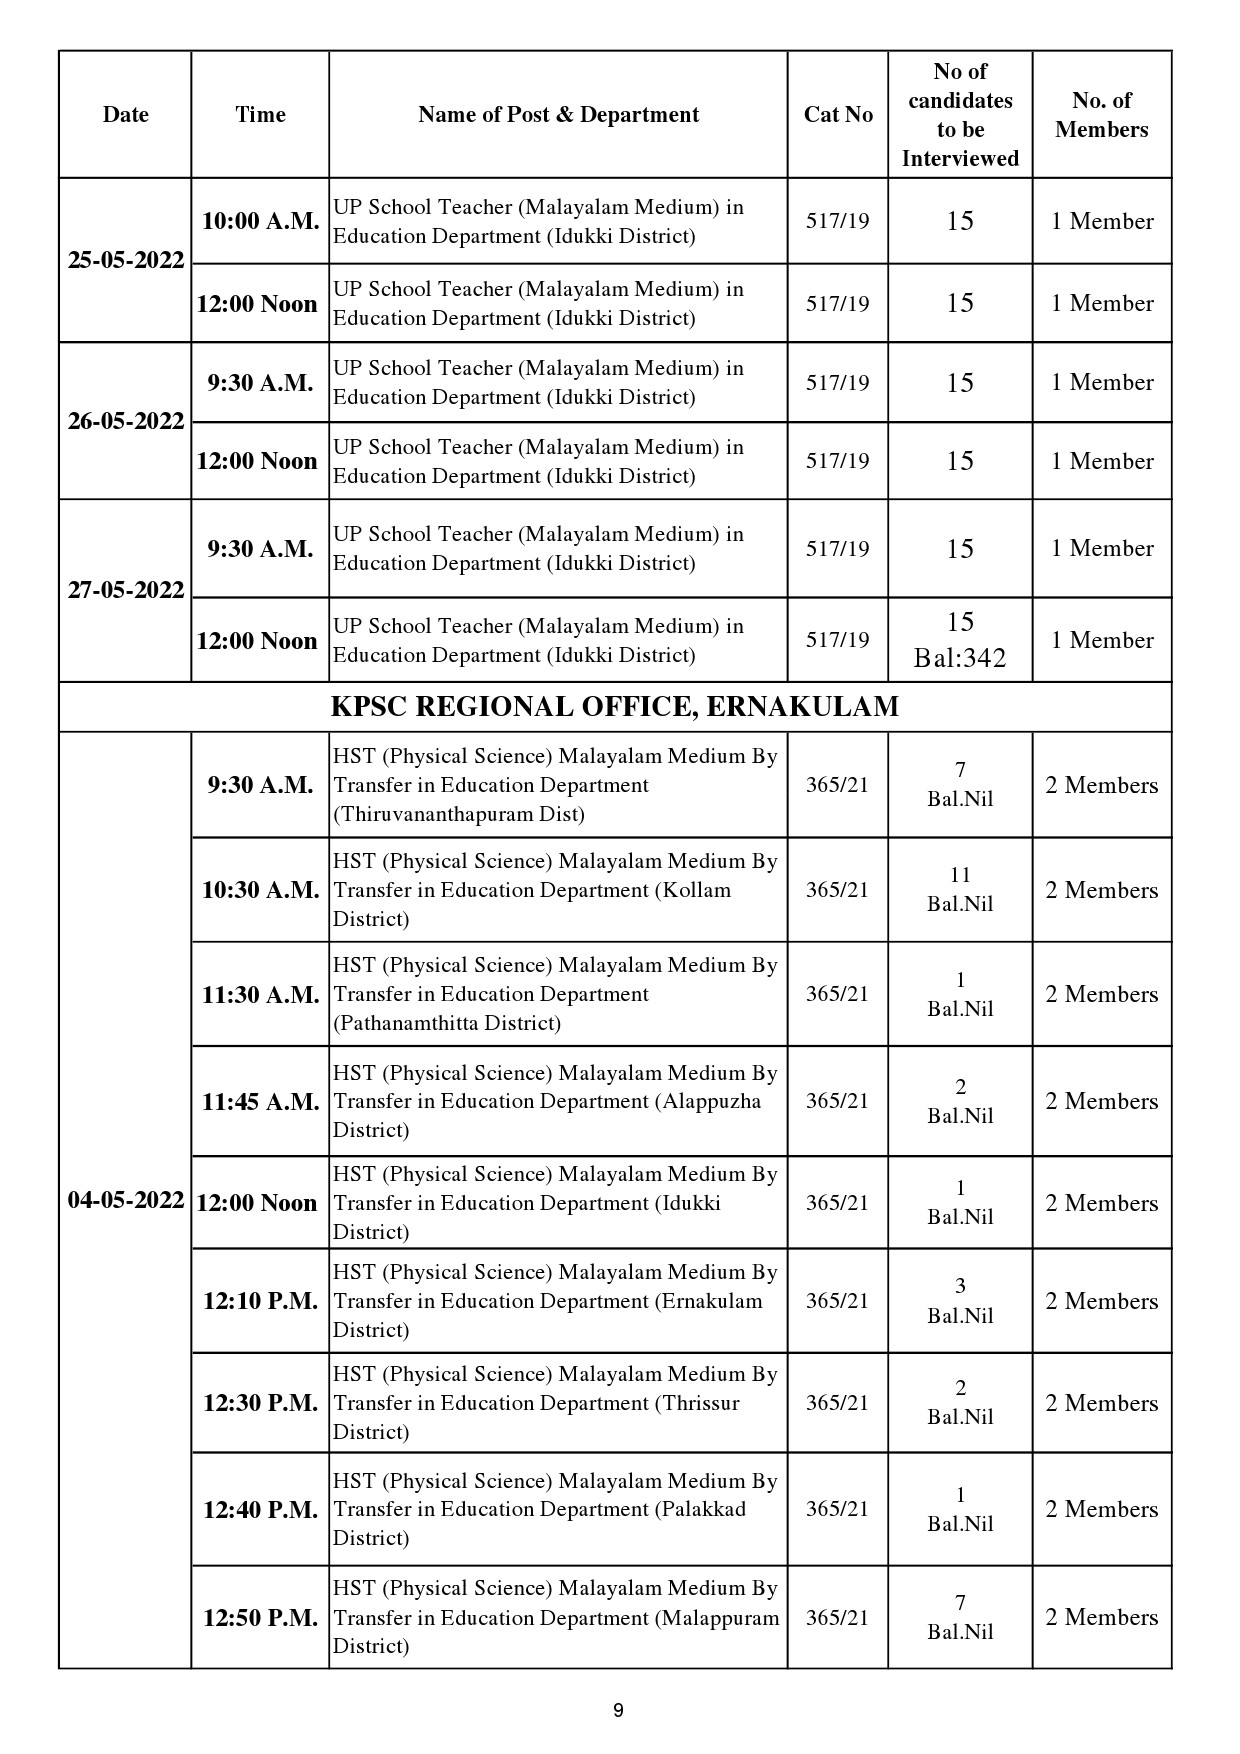 KPSC INTERVIEW PROGRAMME FOR THE MONTH OF MAY 2022 - Notification Image 9